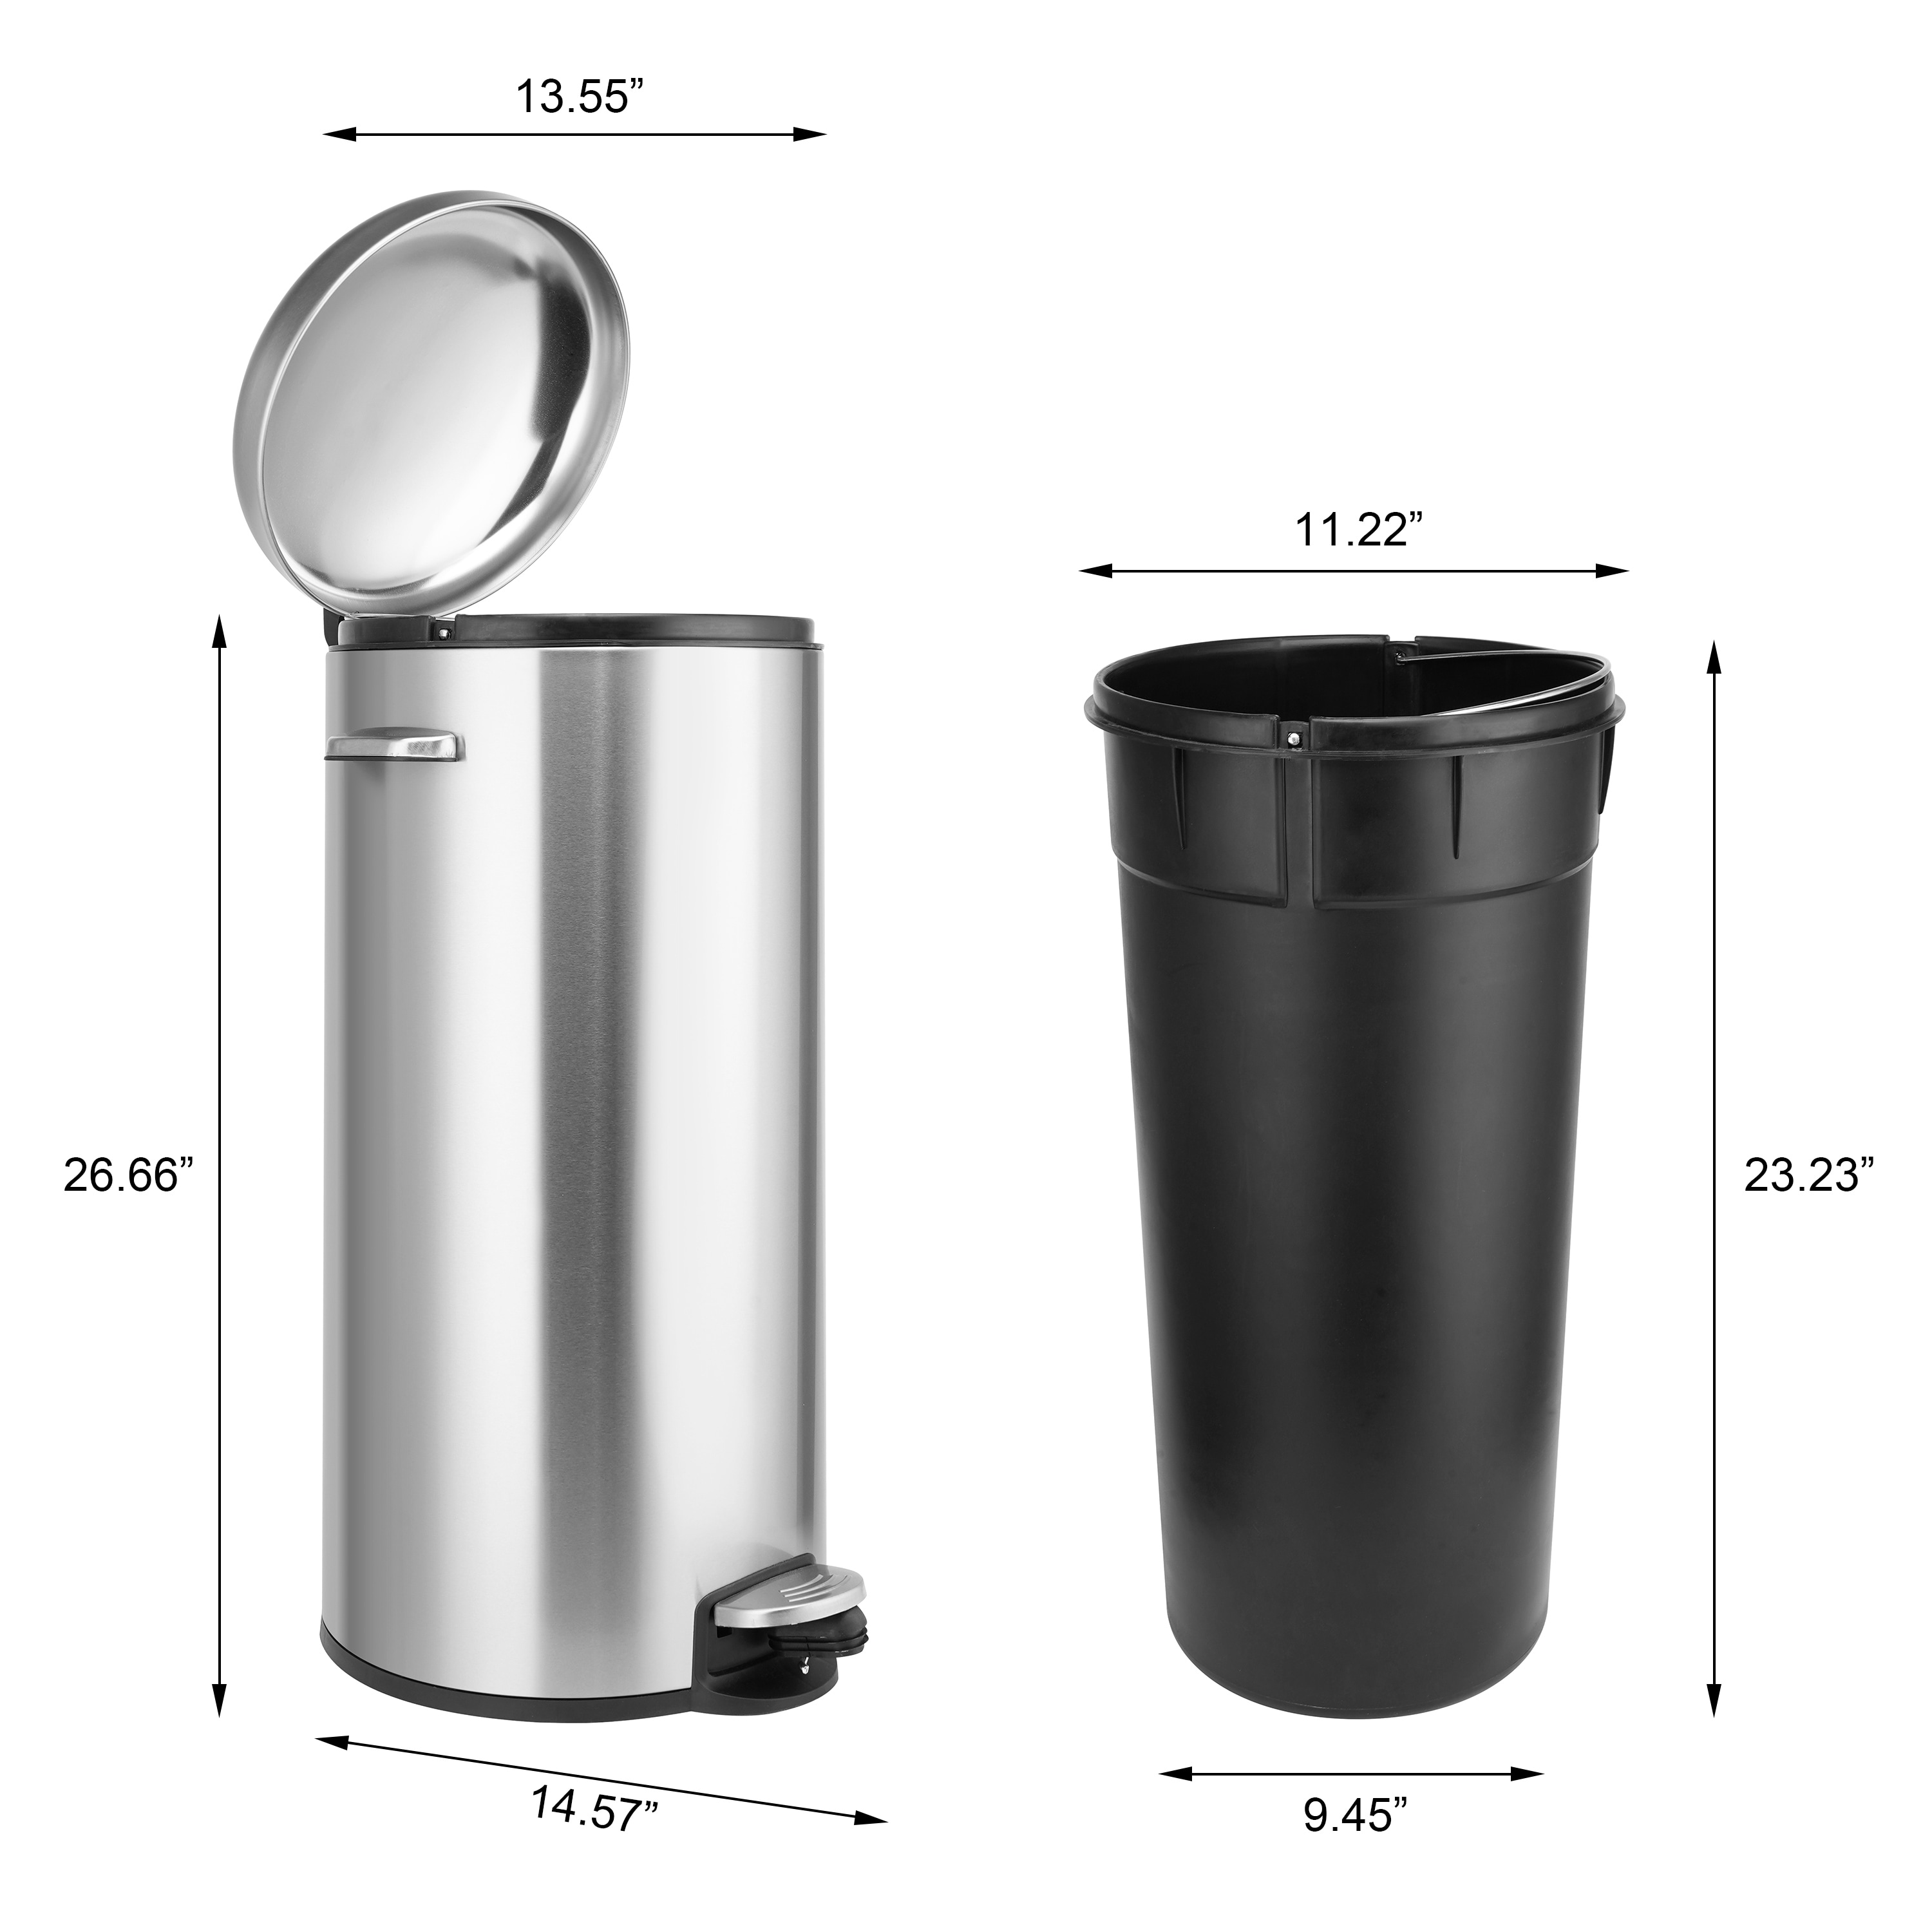 8 Gallon / 30 Liter SoftStep Round Step Pedal Trash Can